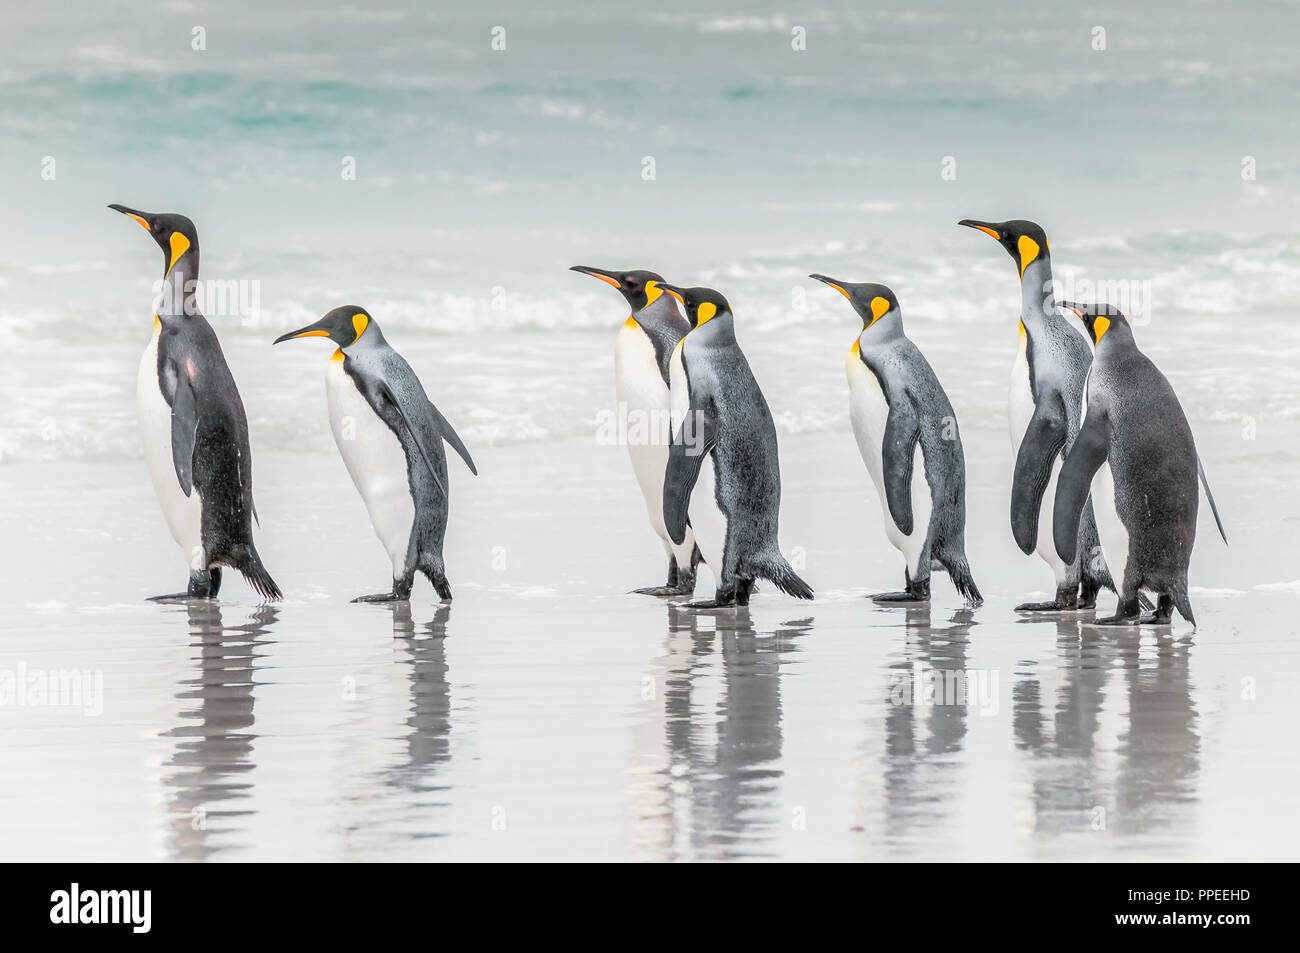 A waddle of Penguins on the beach walking in a row. Stock Photo